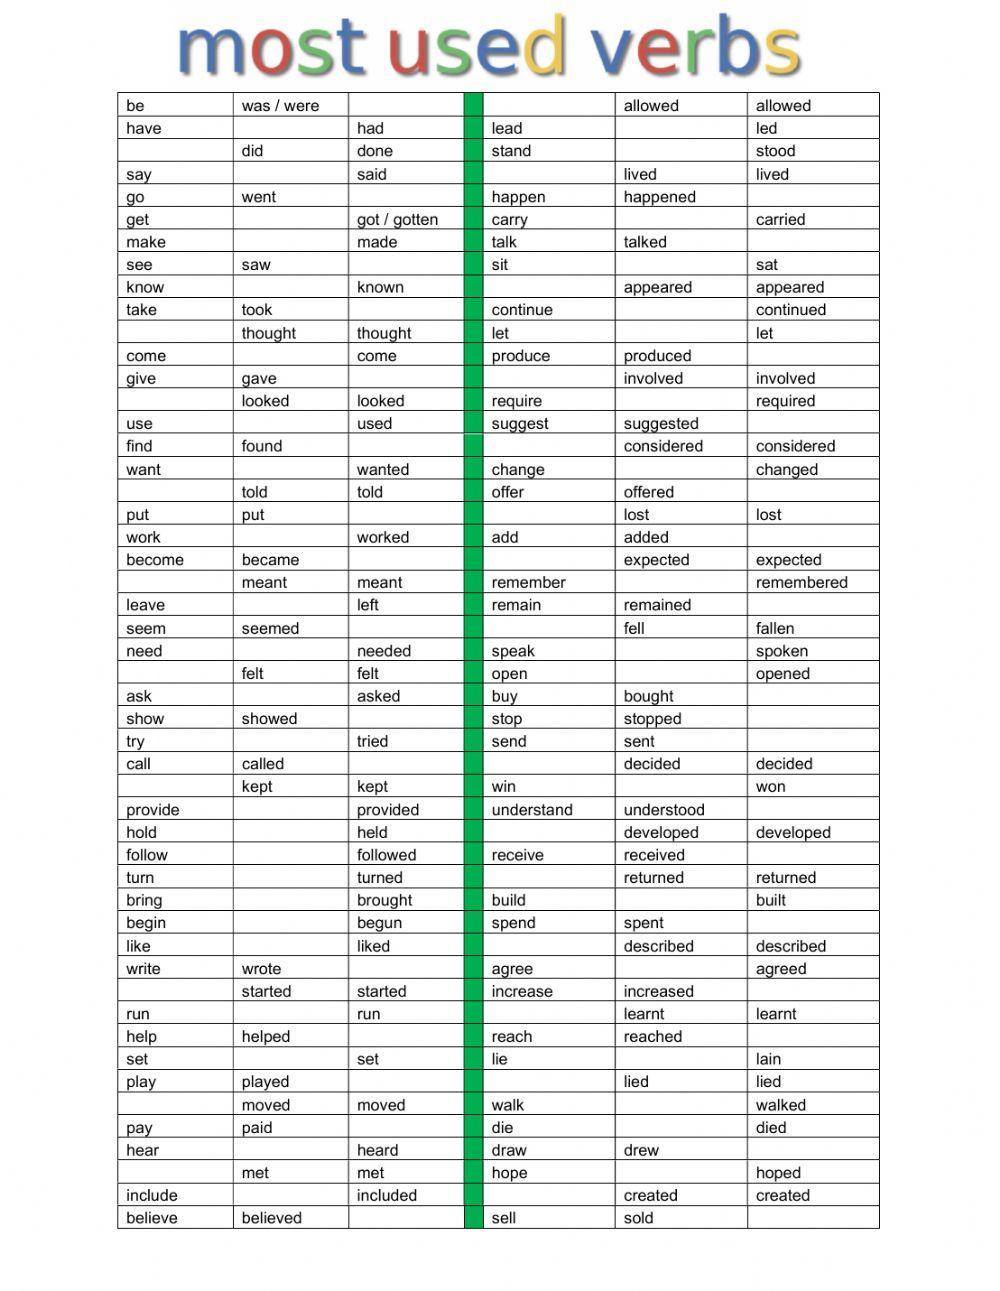 List of most used verbs